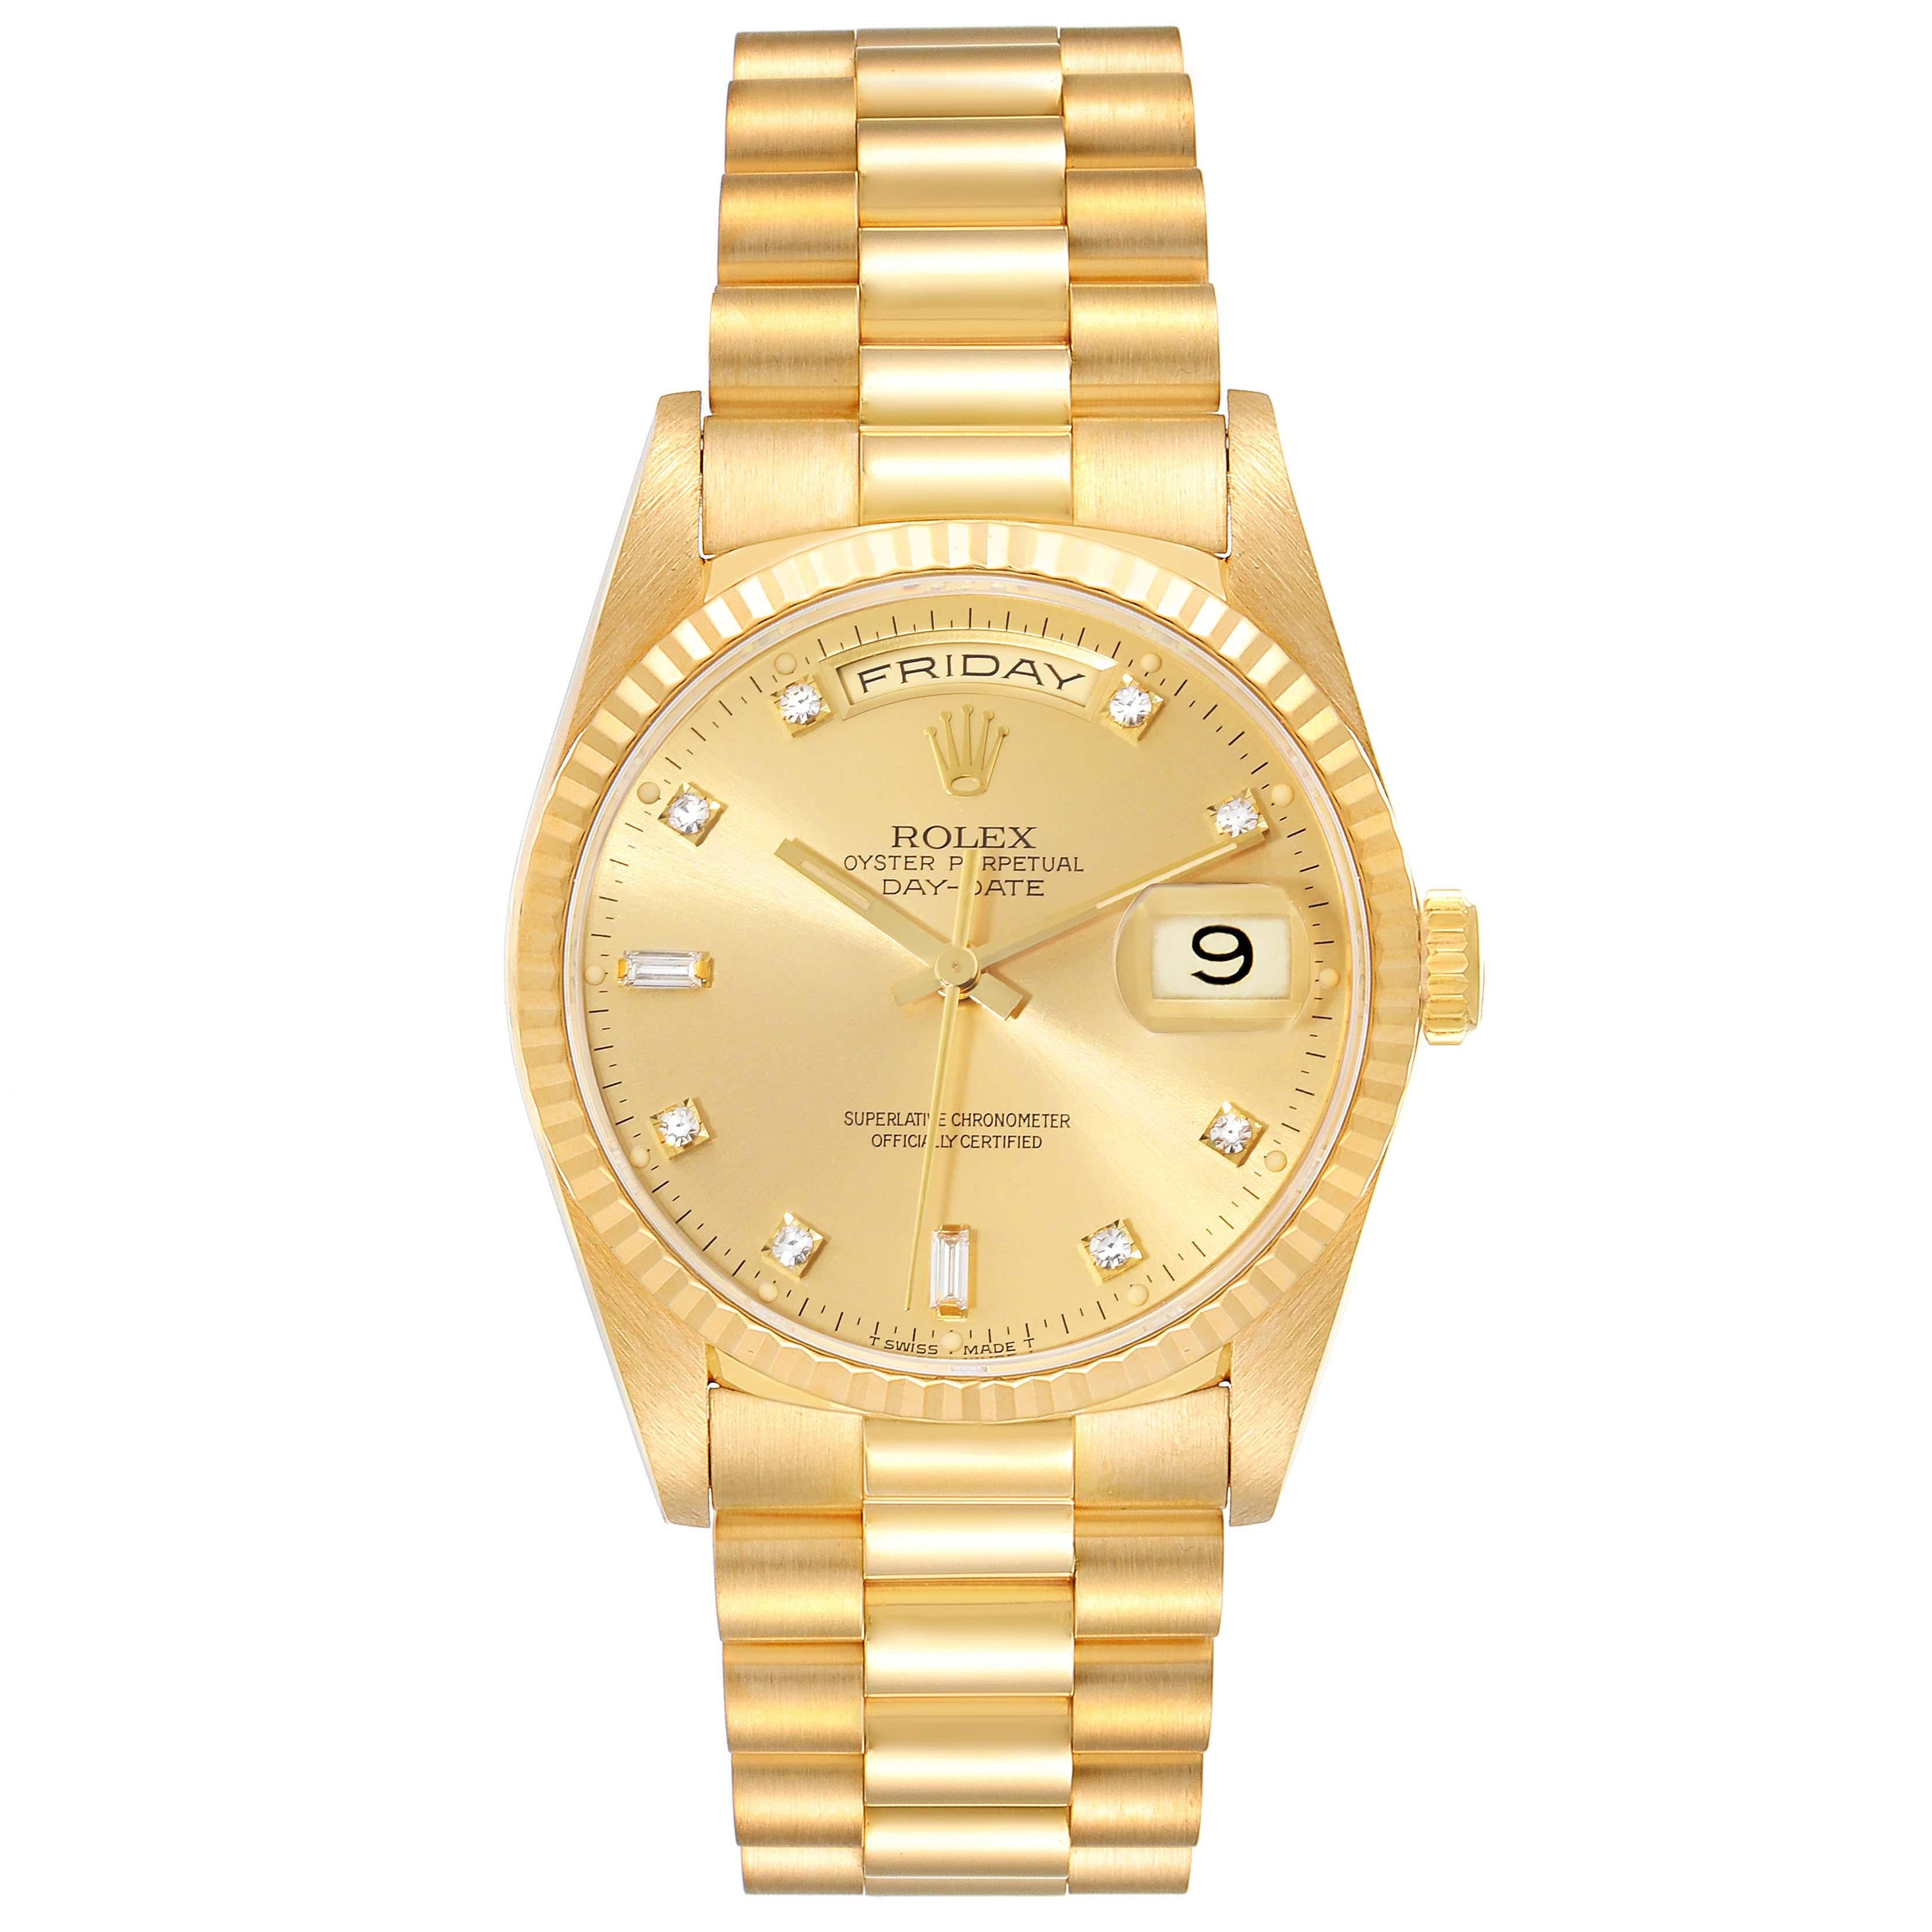 Rolex President Day-Date Yellow Gold Champagne Diamond Dial Mens Watch 18238. Officially certified chronometer automatic self-winding movement. 18k yellow gold oyster case 36.0 mm in diameter. Rolex logo on the crown. 18k yellow gold fluted bezel.